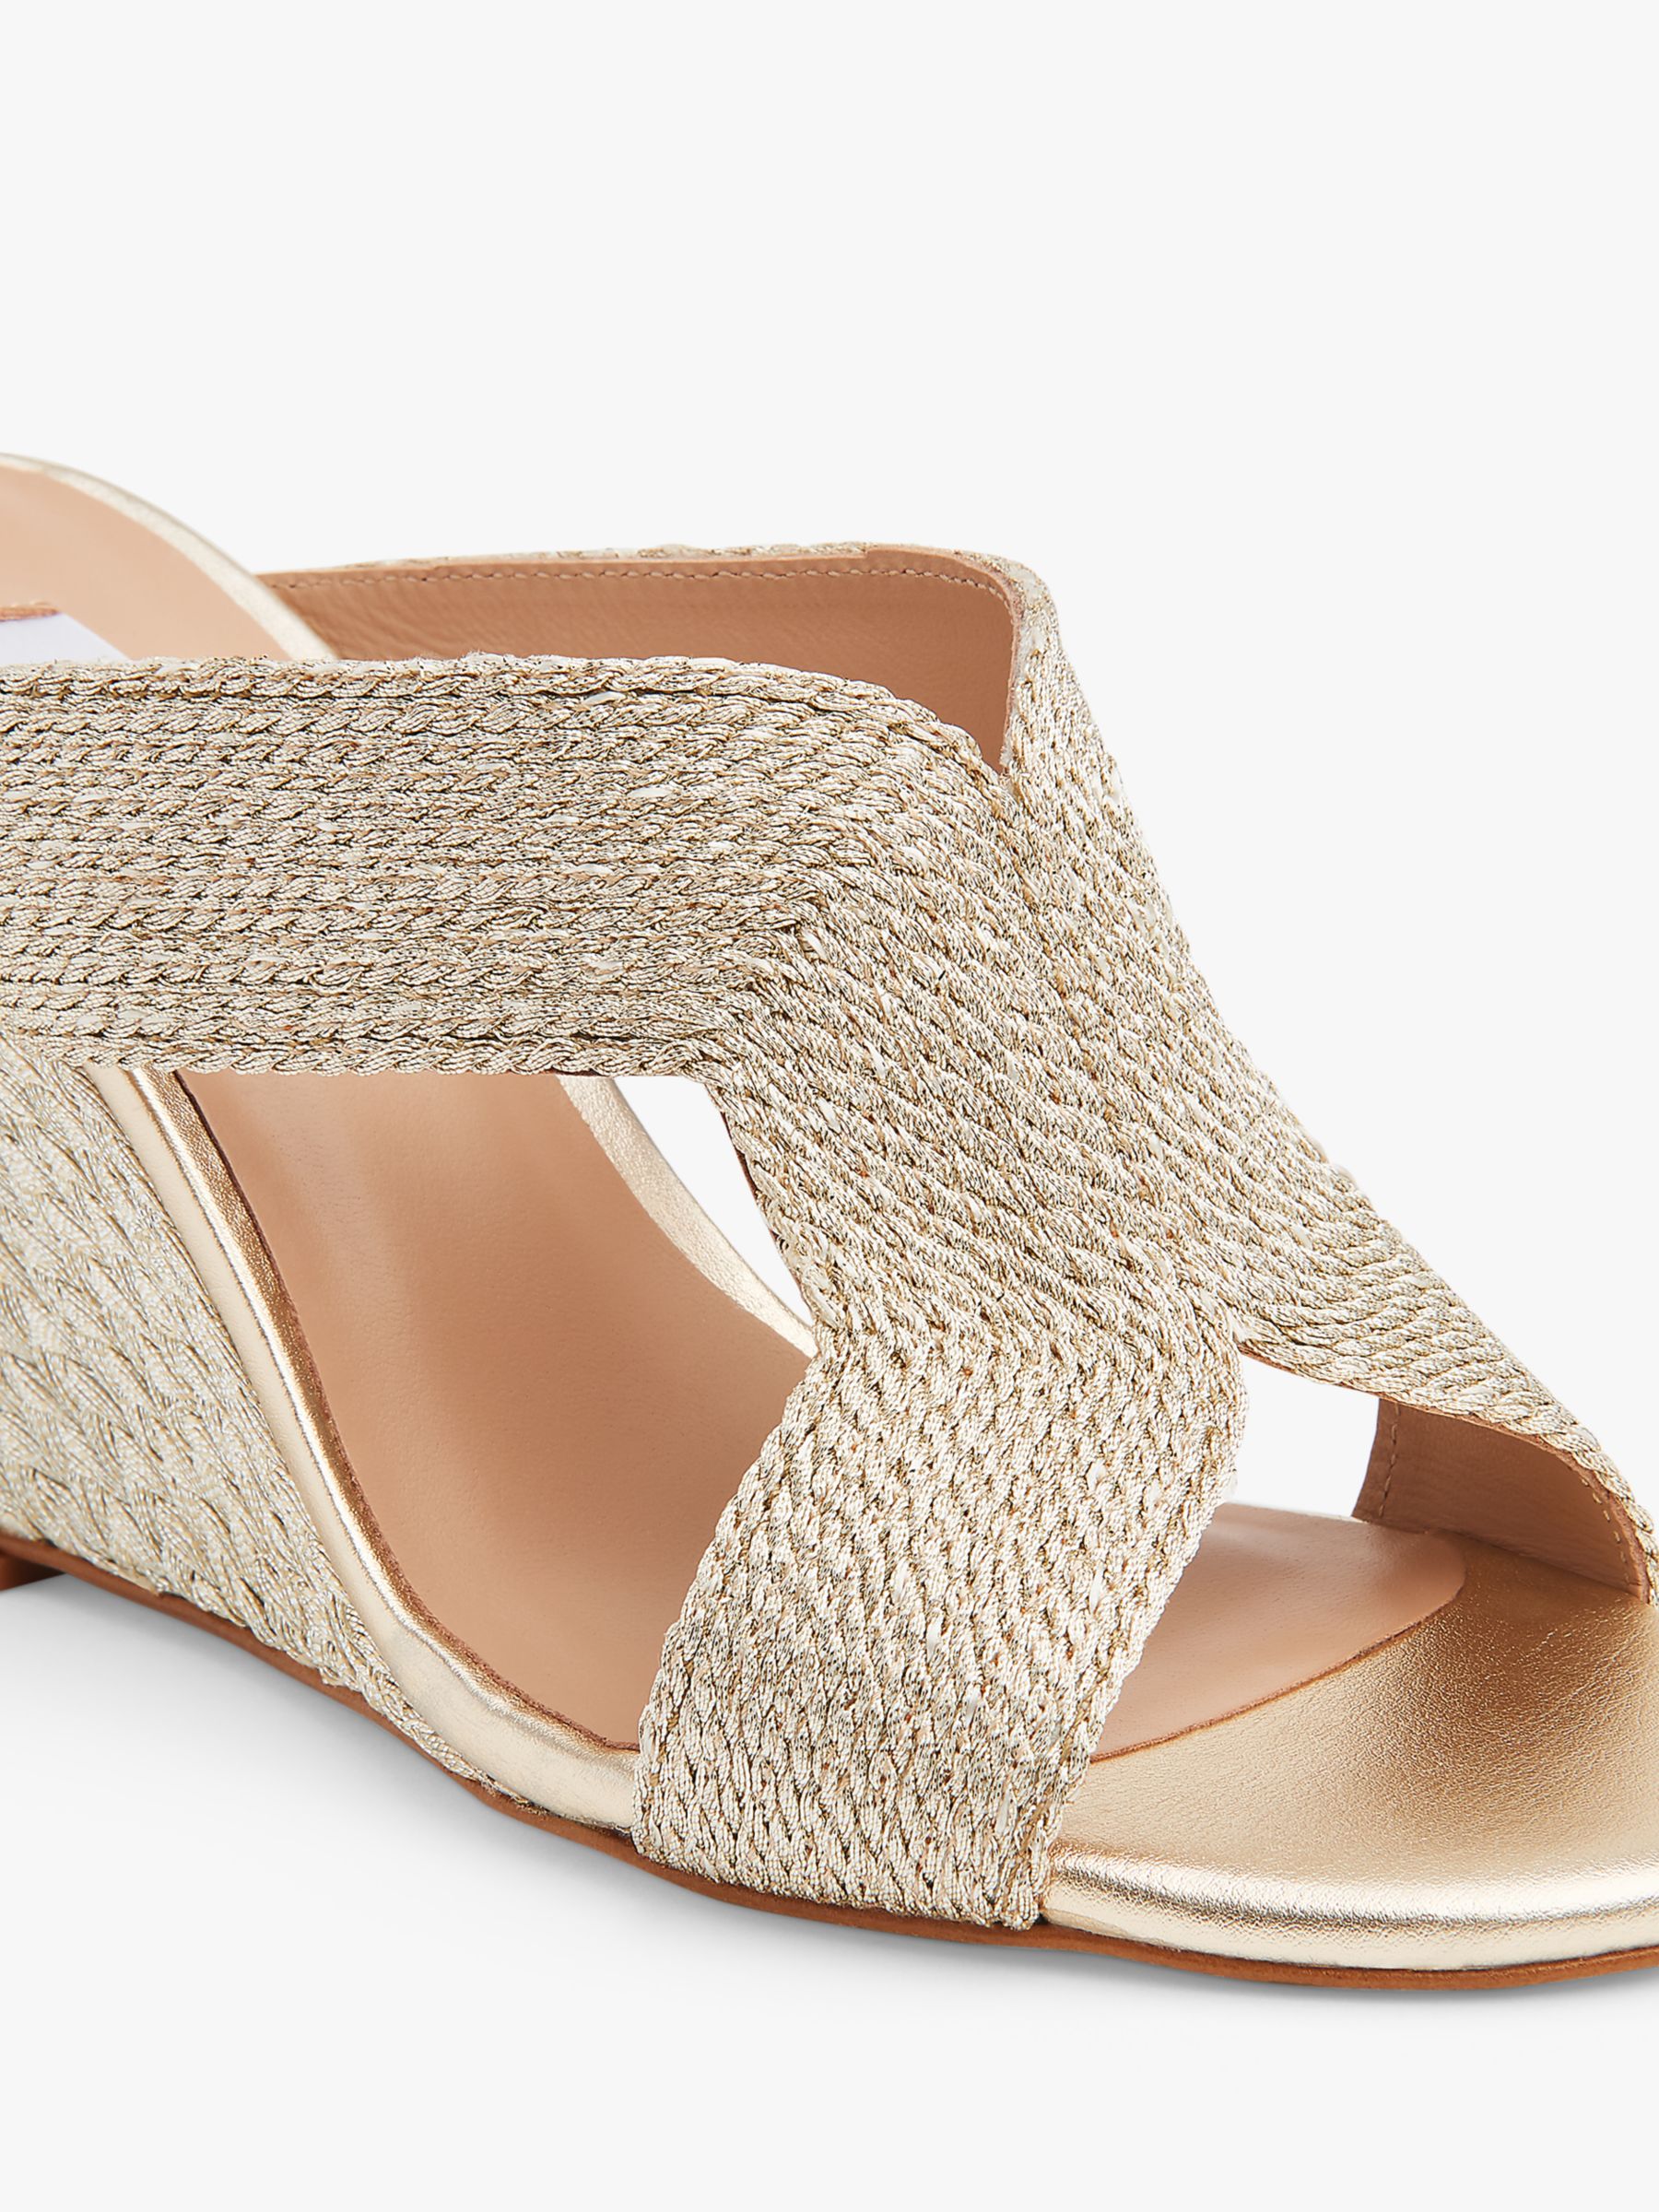 L.K.Bennett Sonia Rope Mule Wedges, Soft Gold at John Lewis & Partners